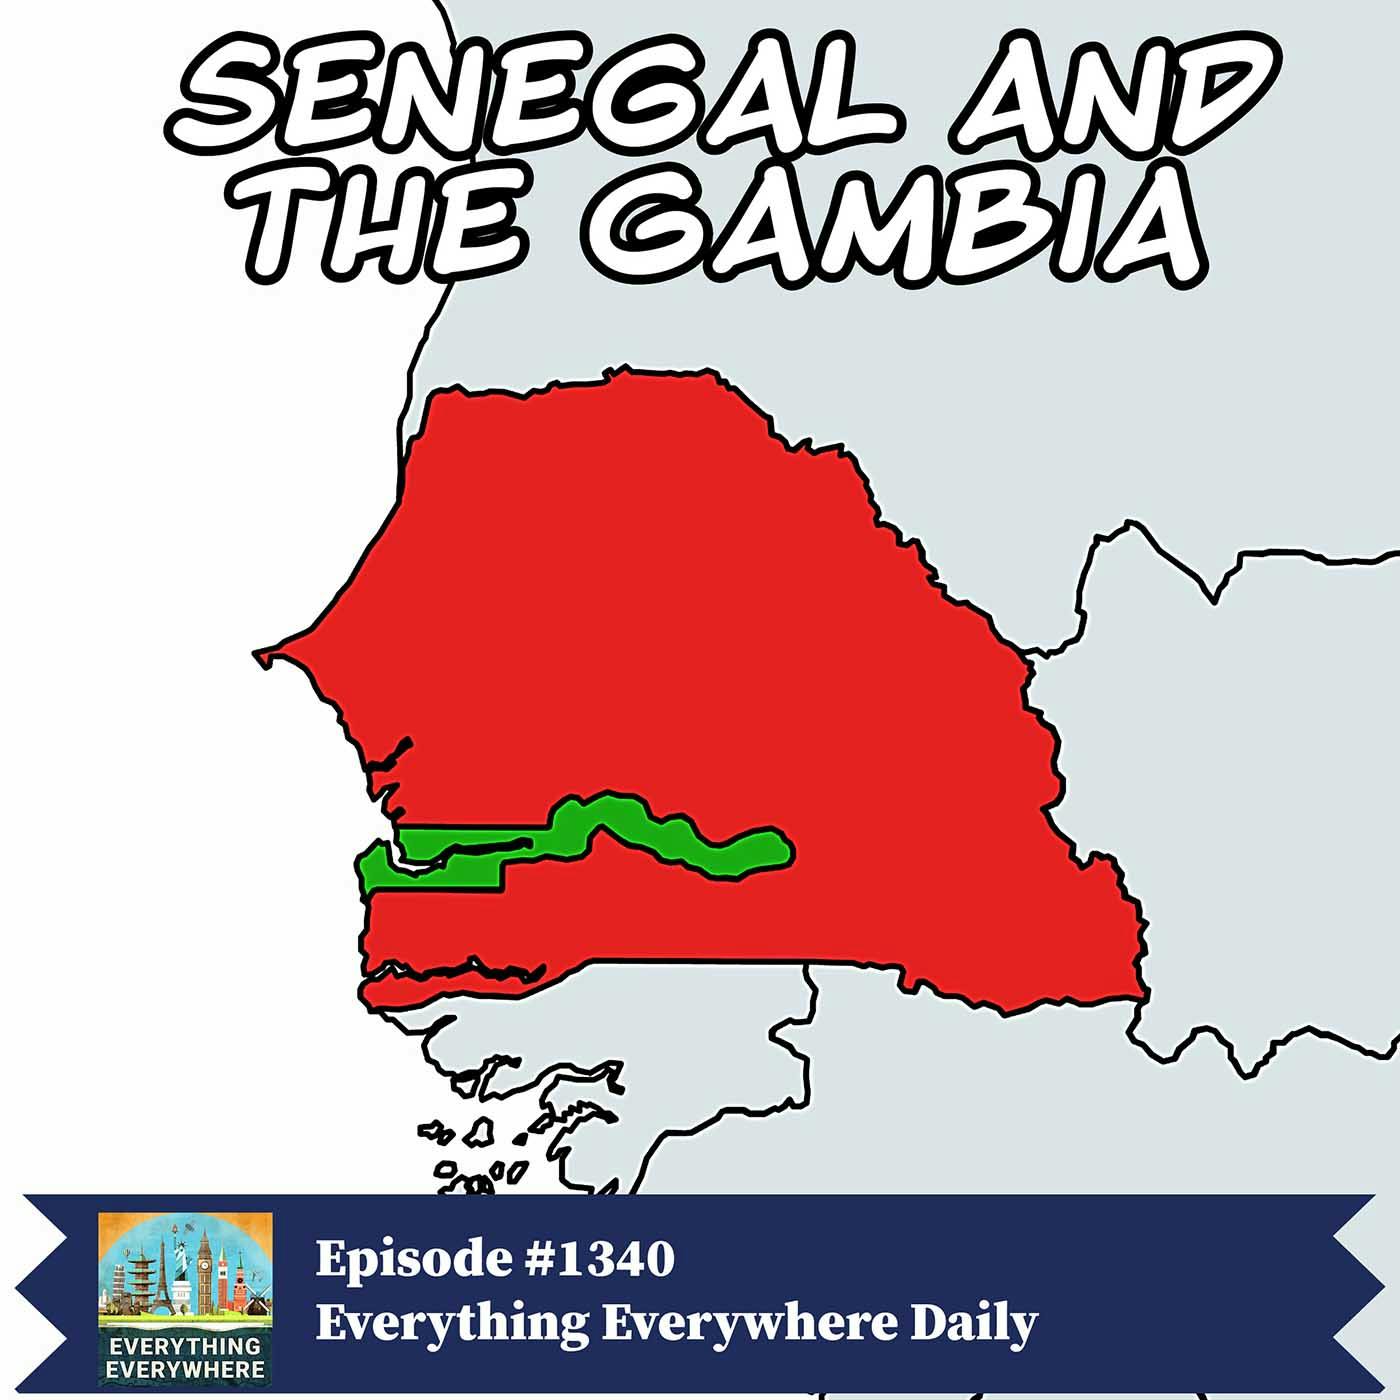 Senegal and The Gambia